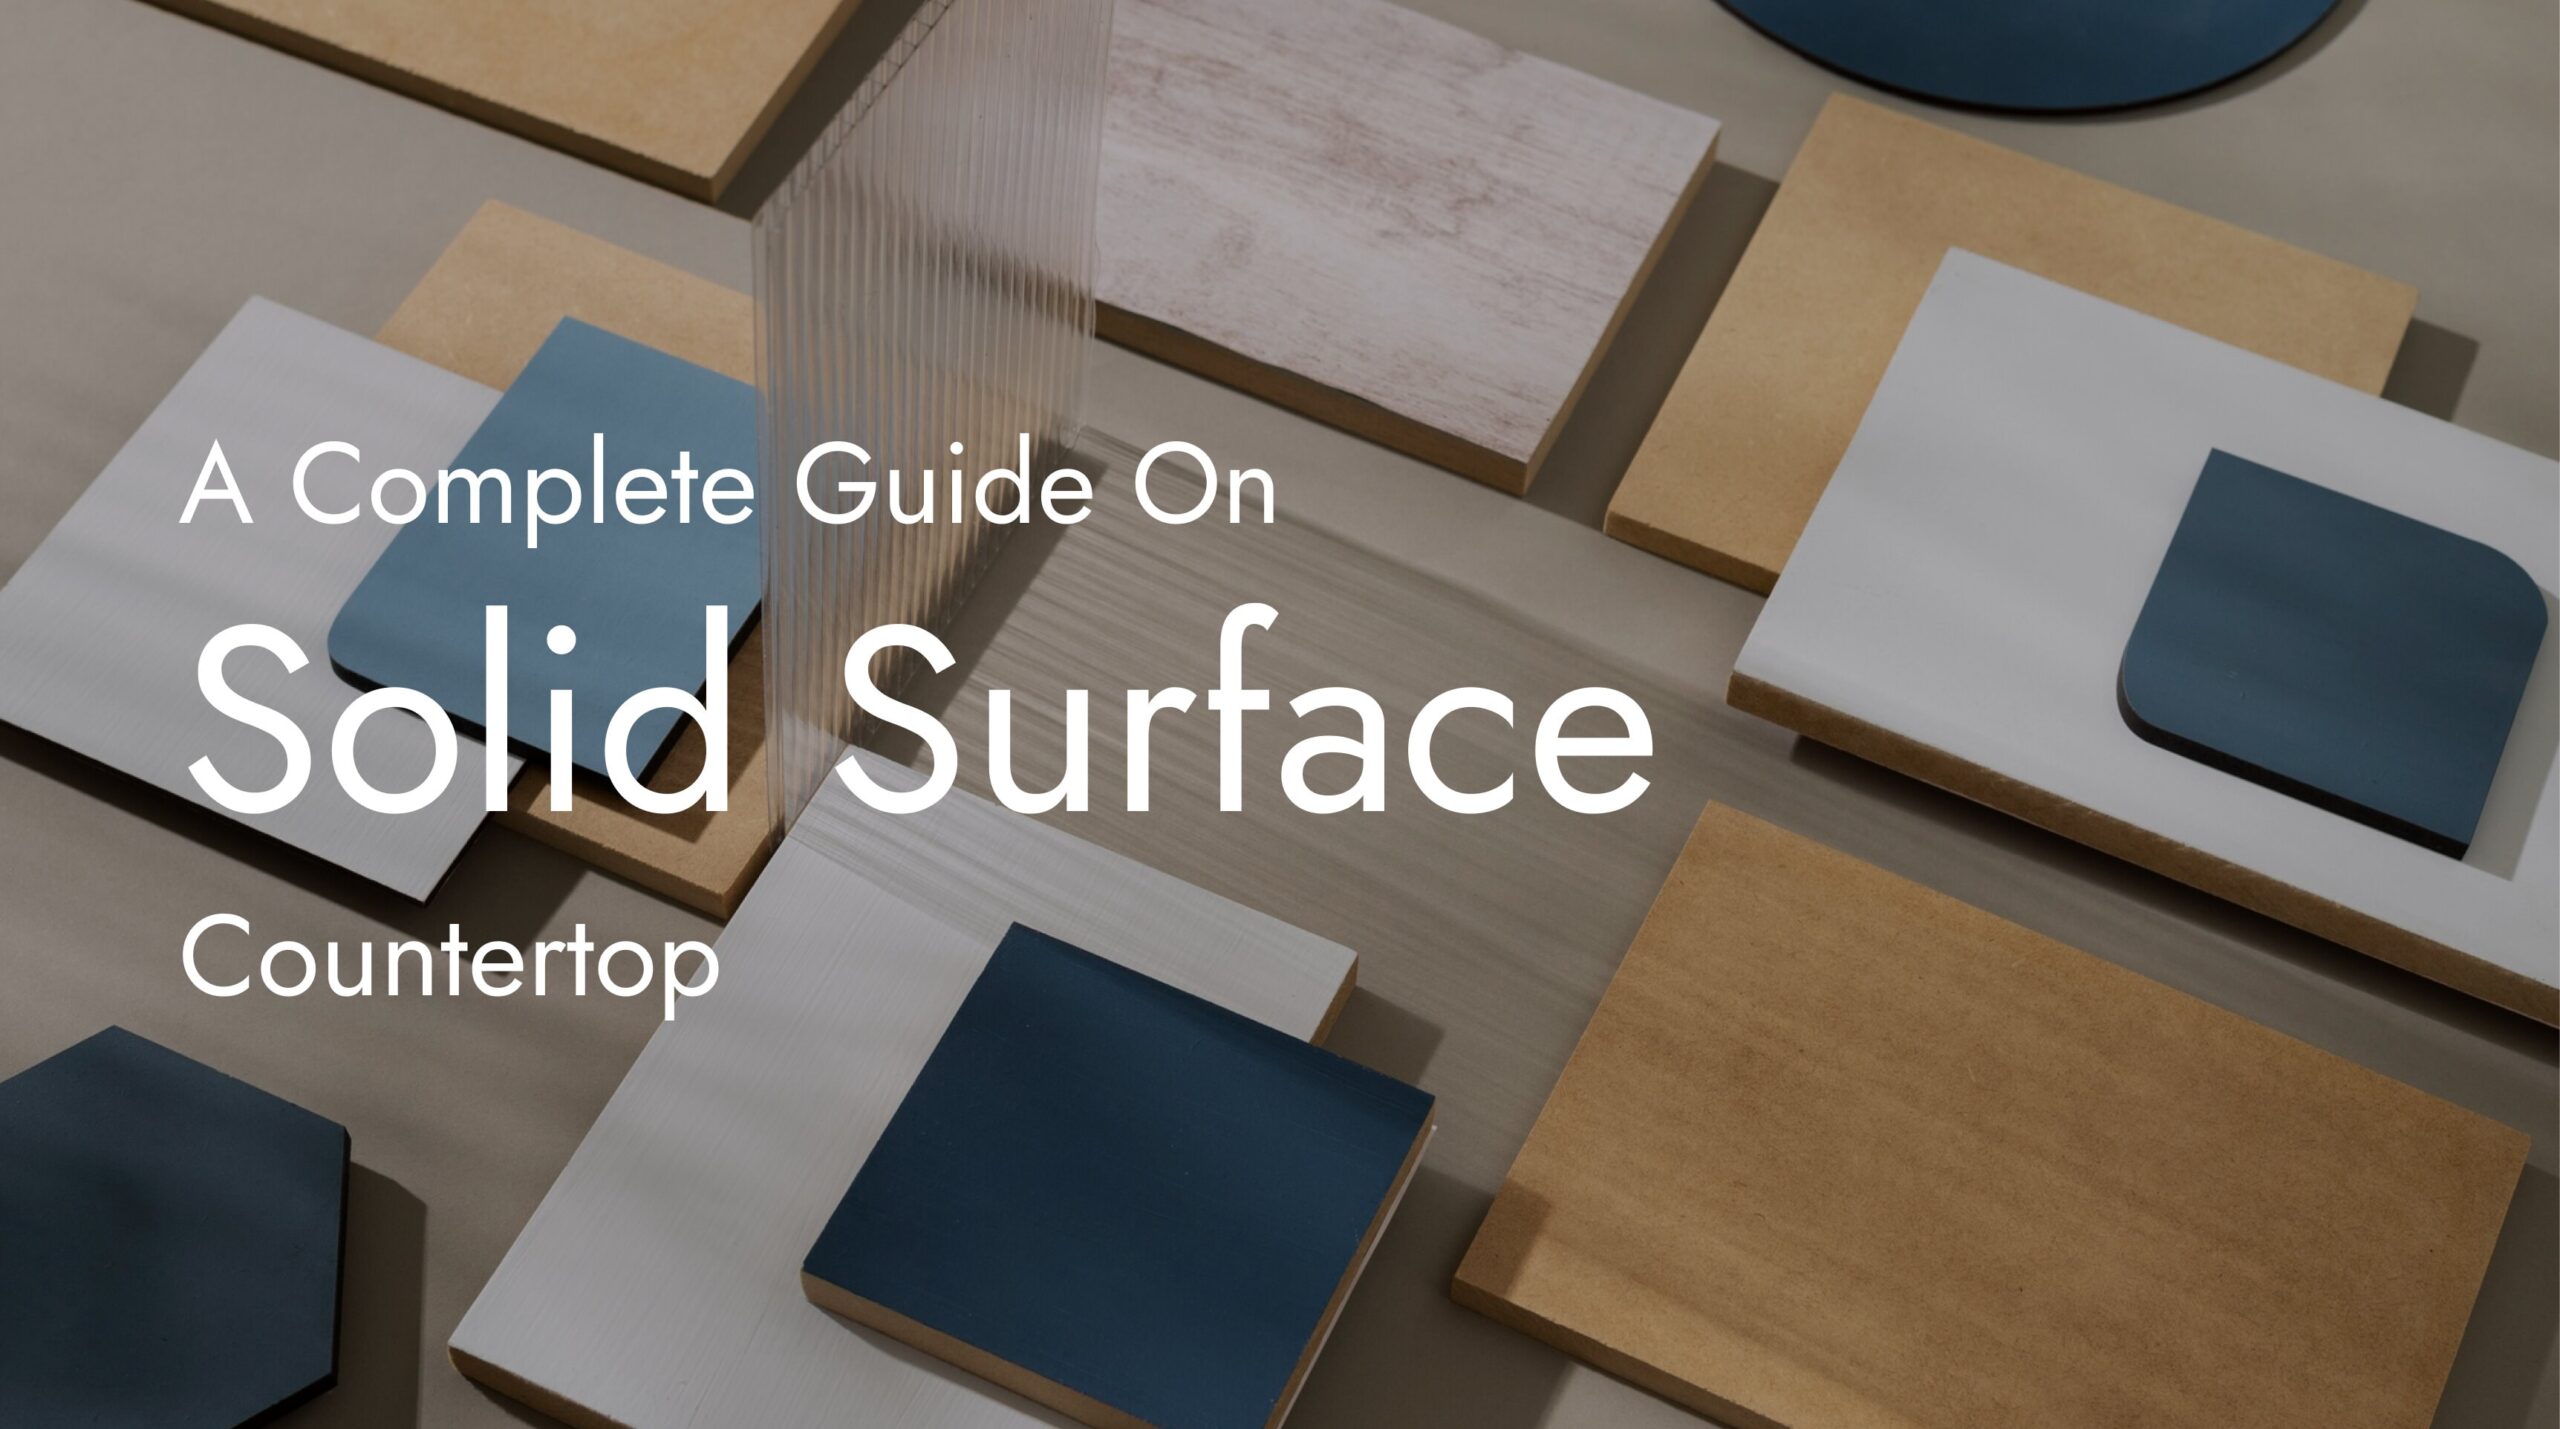 What Is A Solid Surface Countertop? - Complete Guide